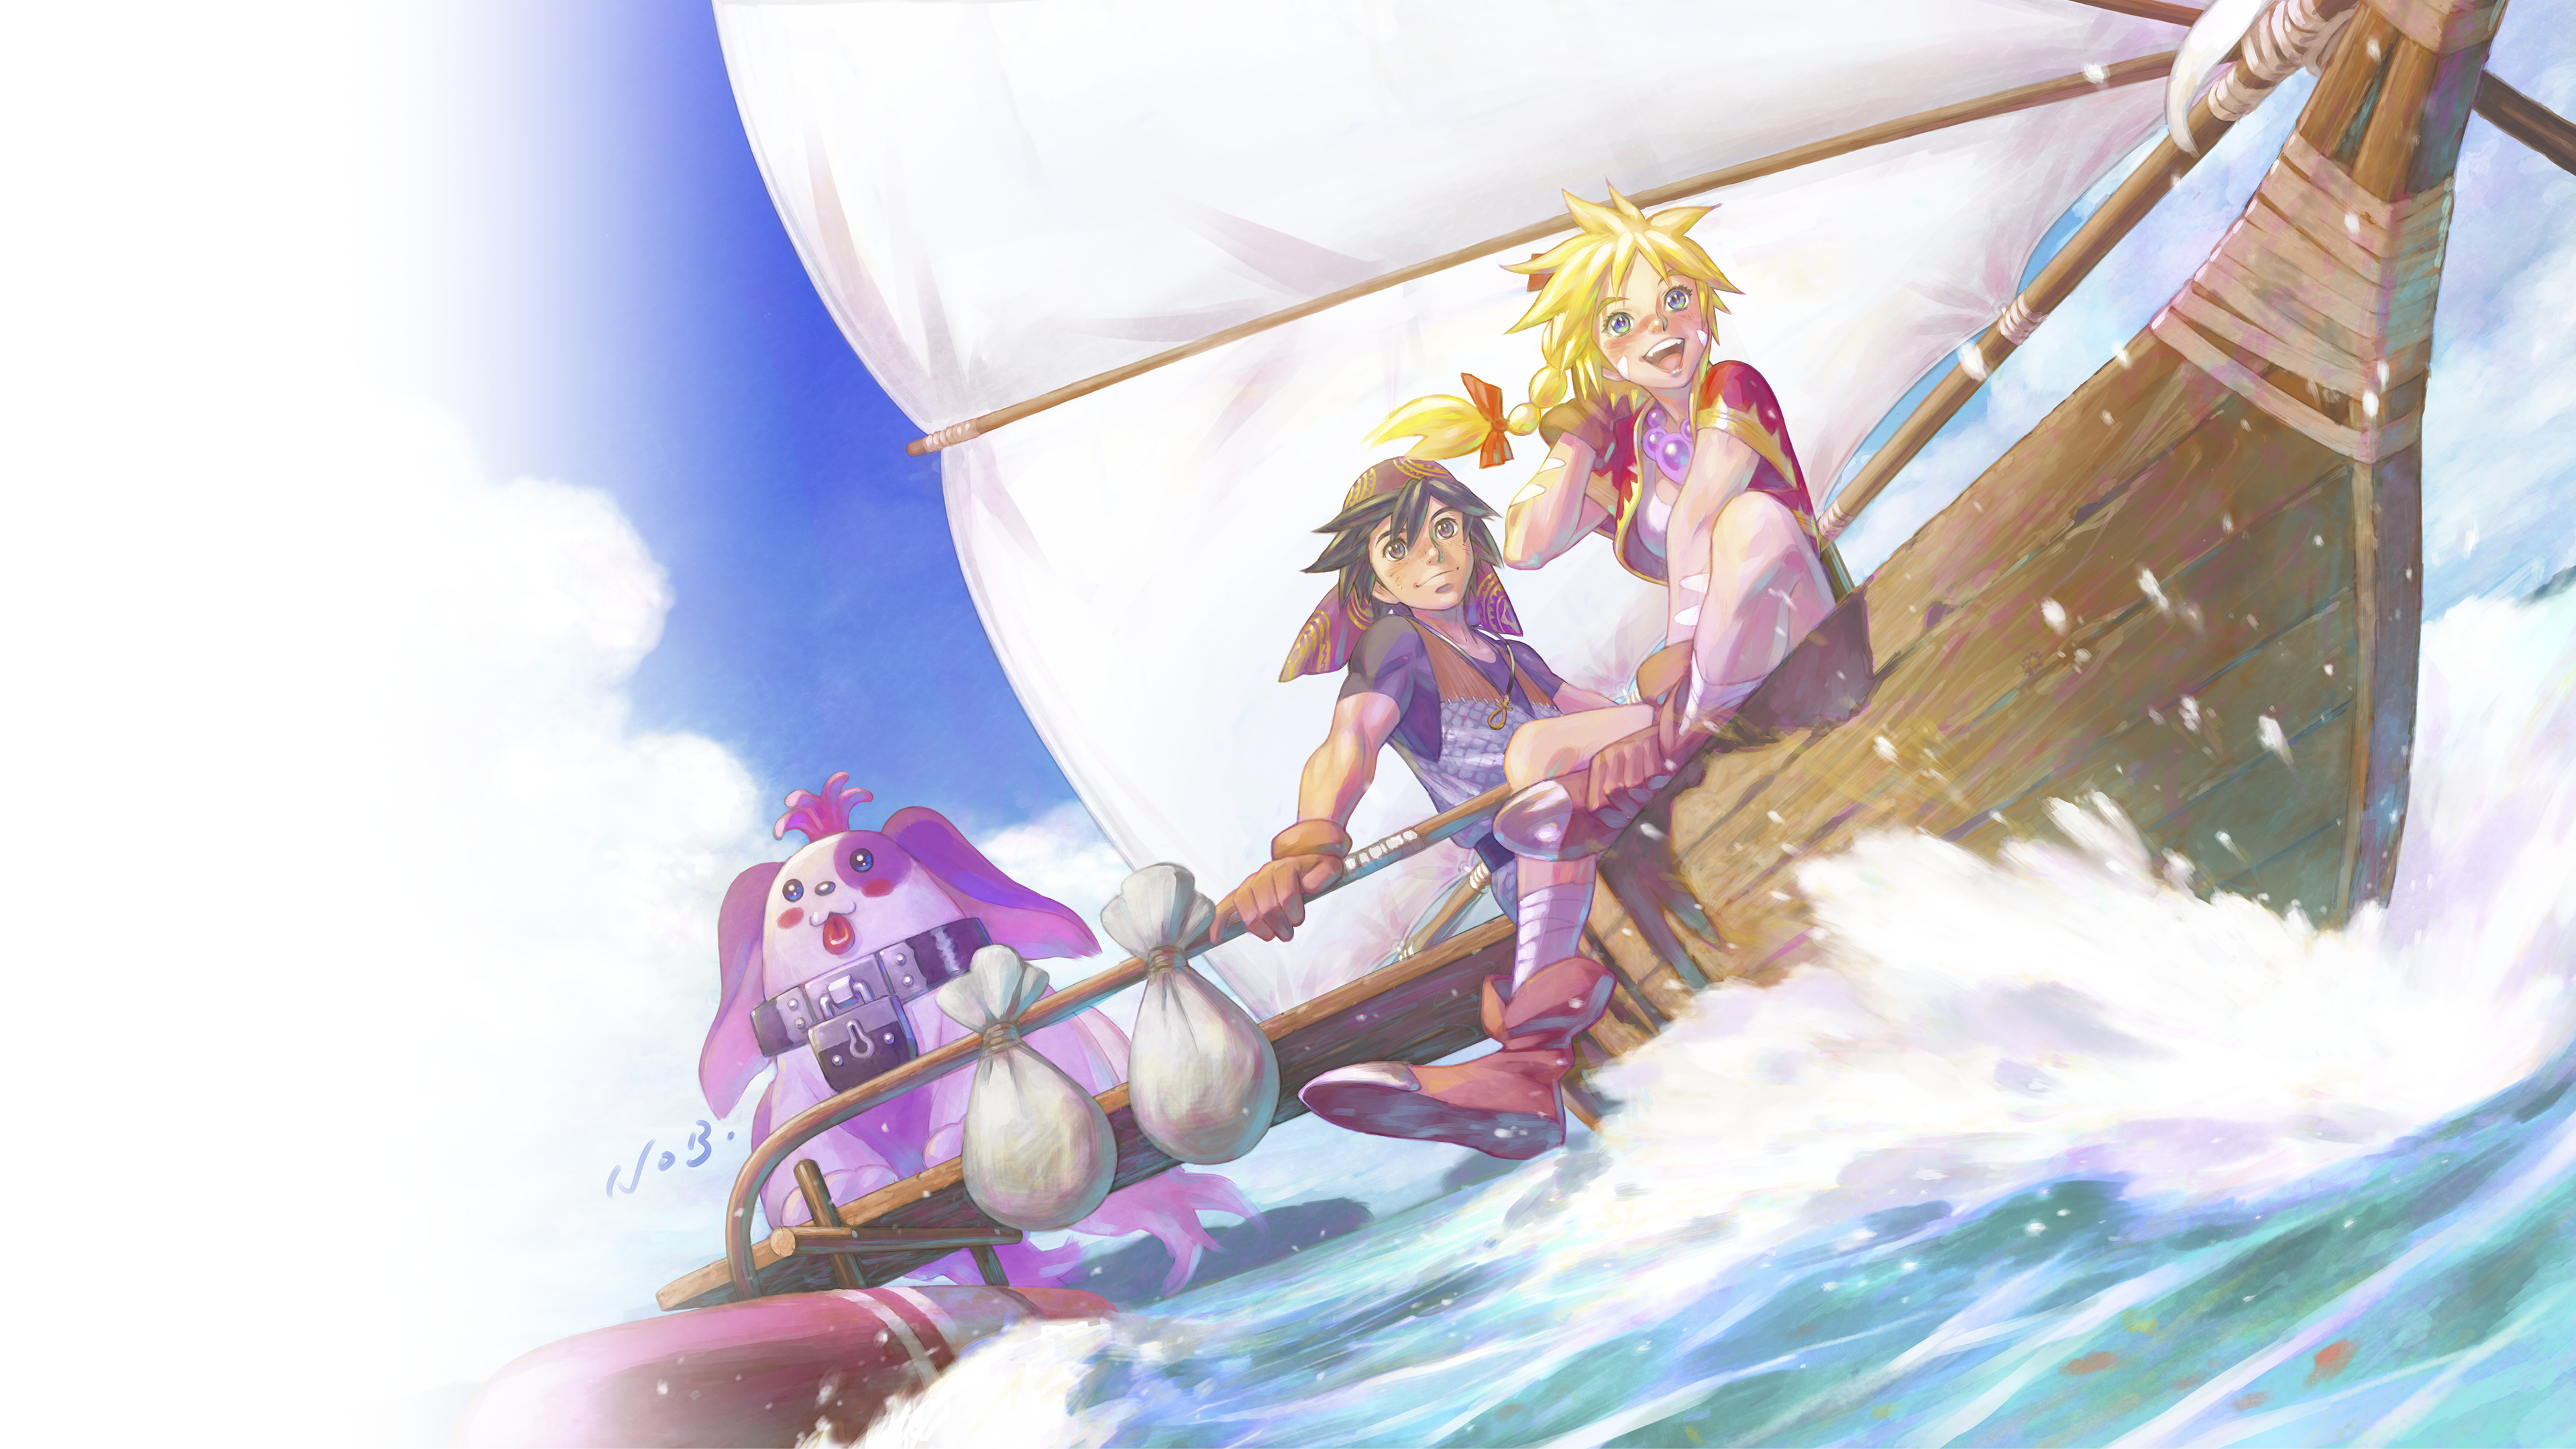 Chrono cross: the radical dreamers edition hero artwork showing three characters on a boat